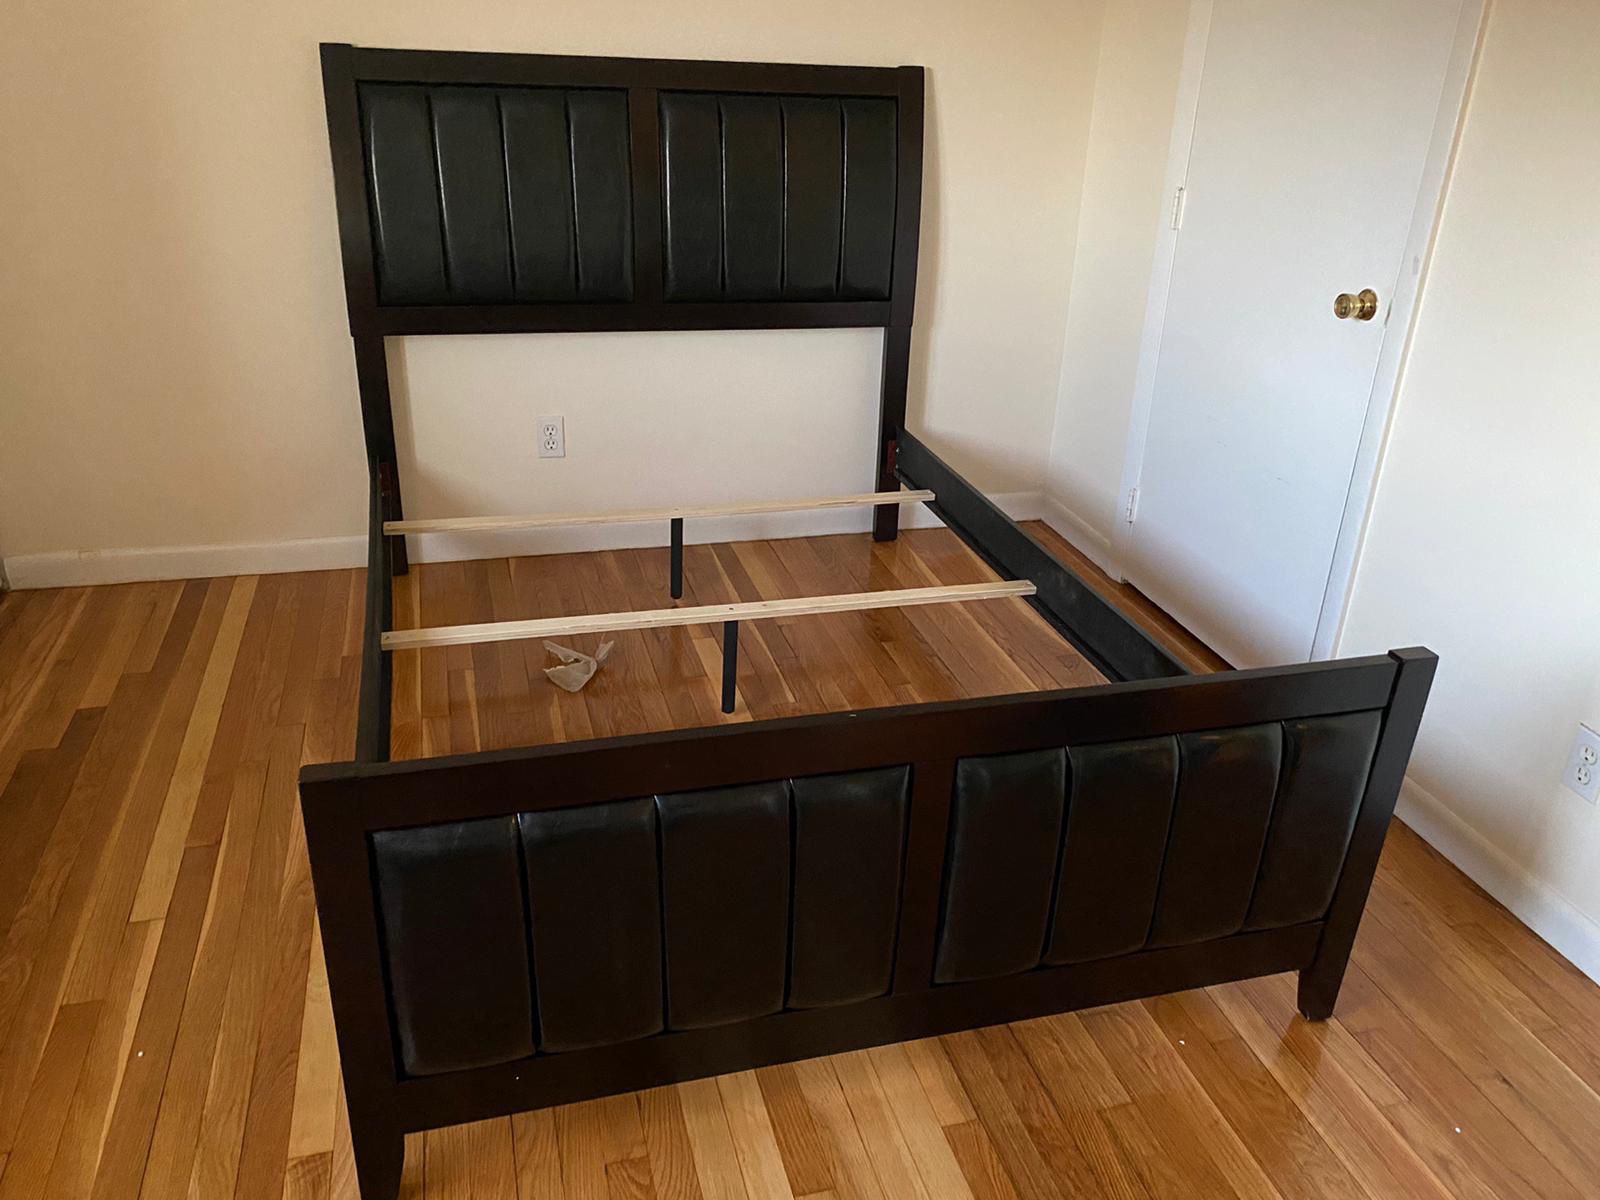 BRAND NEW IN BOX QUEEN SIZE BED FRAME > ESPRESSO COLOR